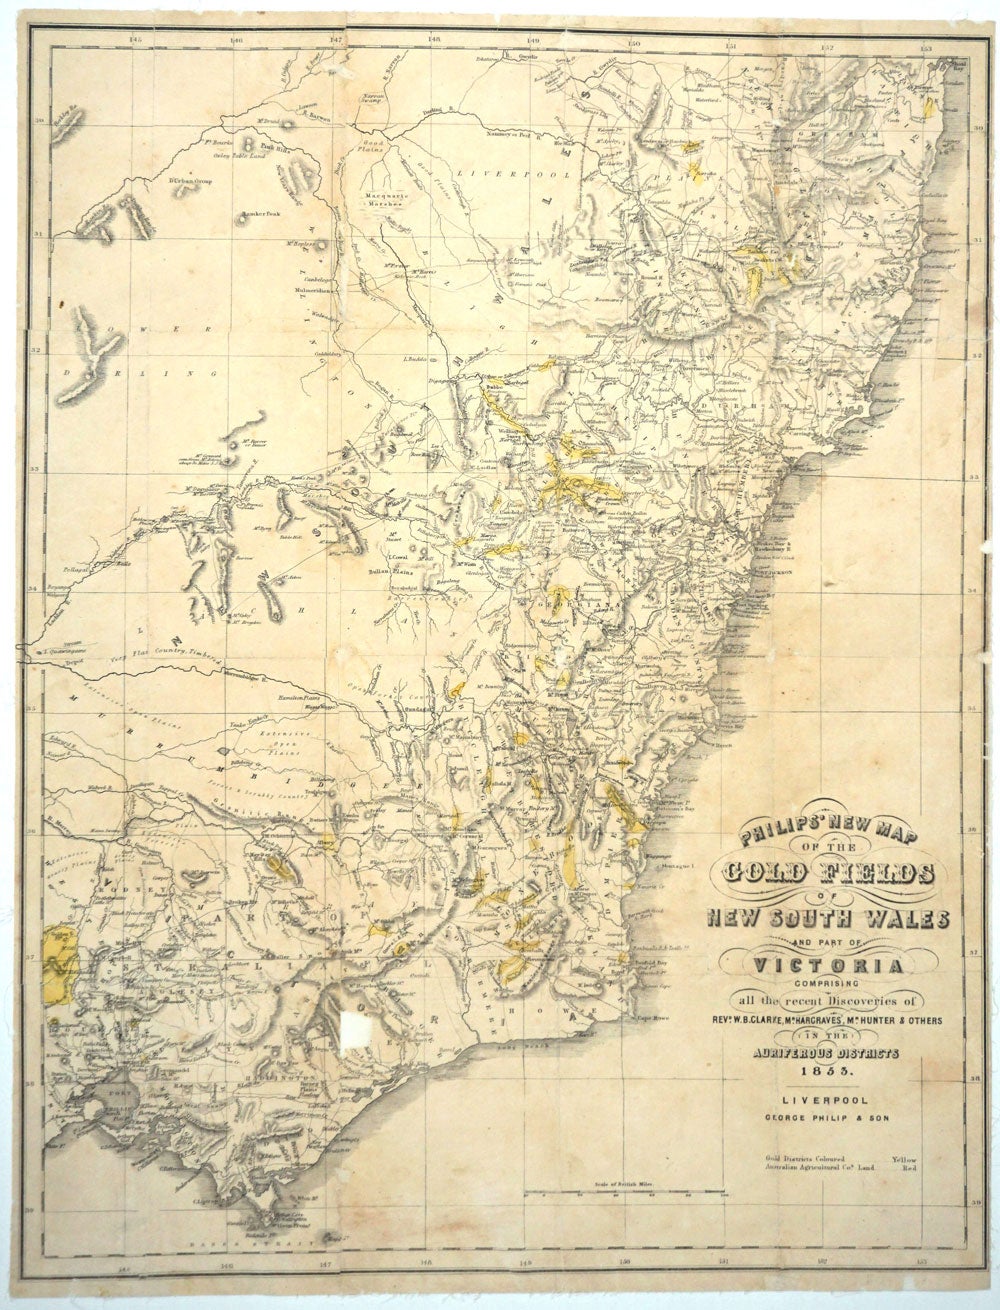 Historical Gold Maps of the New South Wales Goldfields